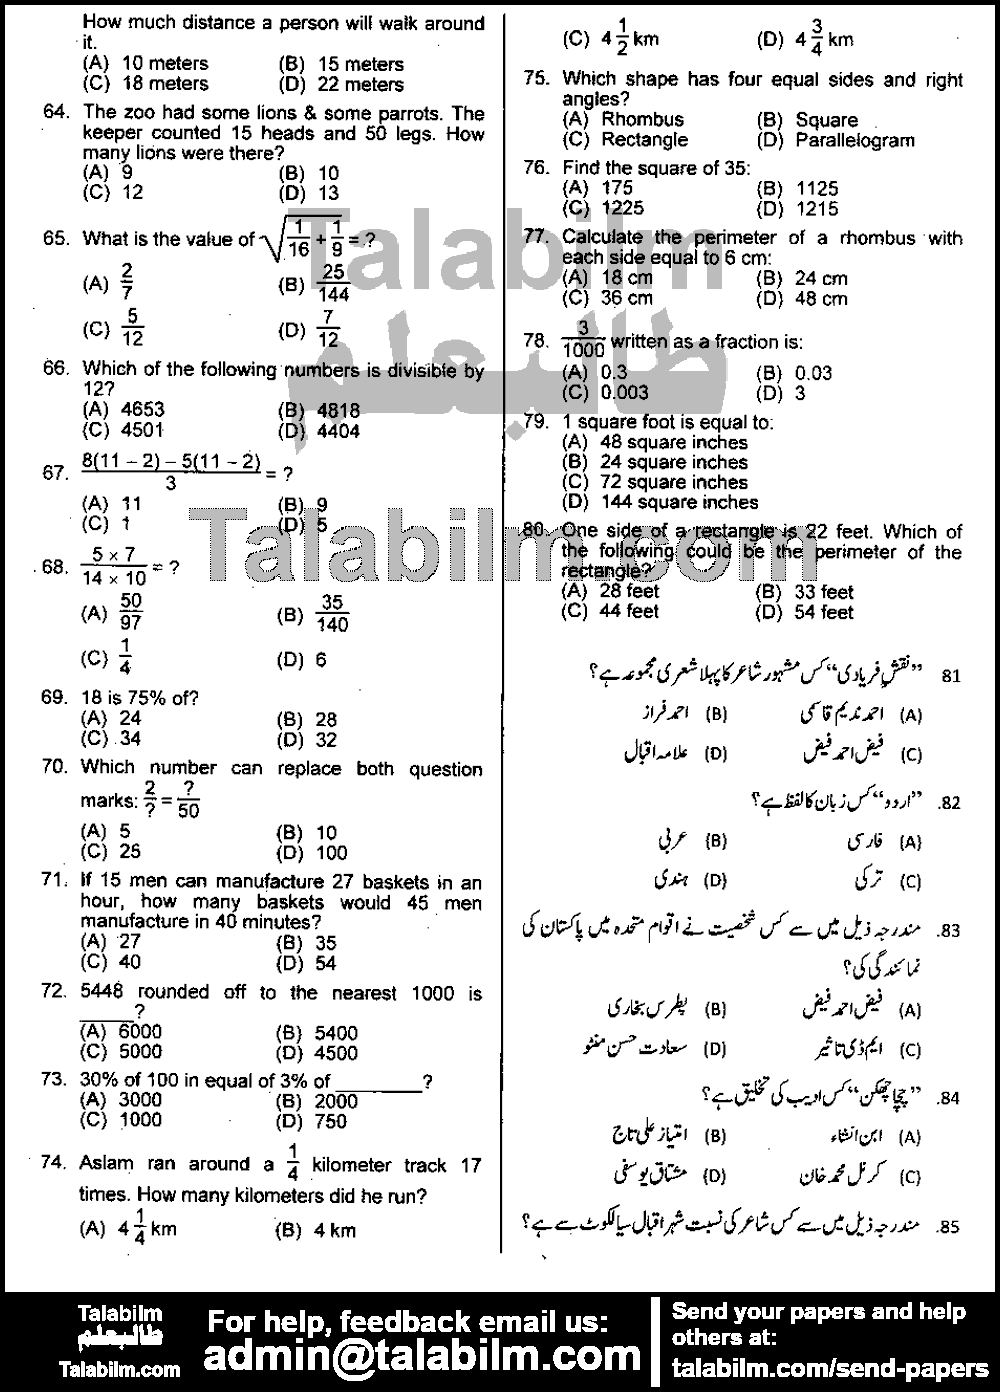 Auditor Punjab Finance Department 0 past paper for 2010 Page No. 3